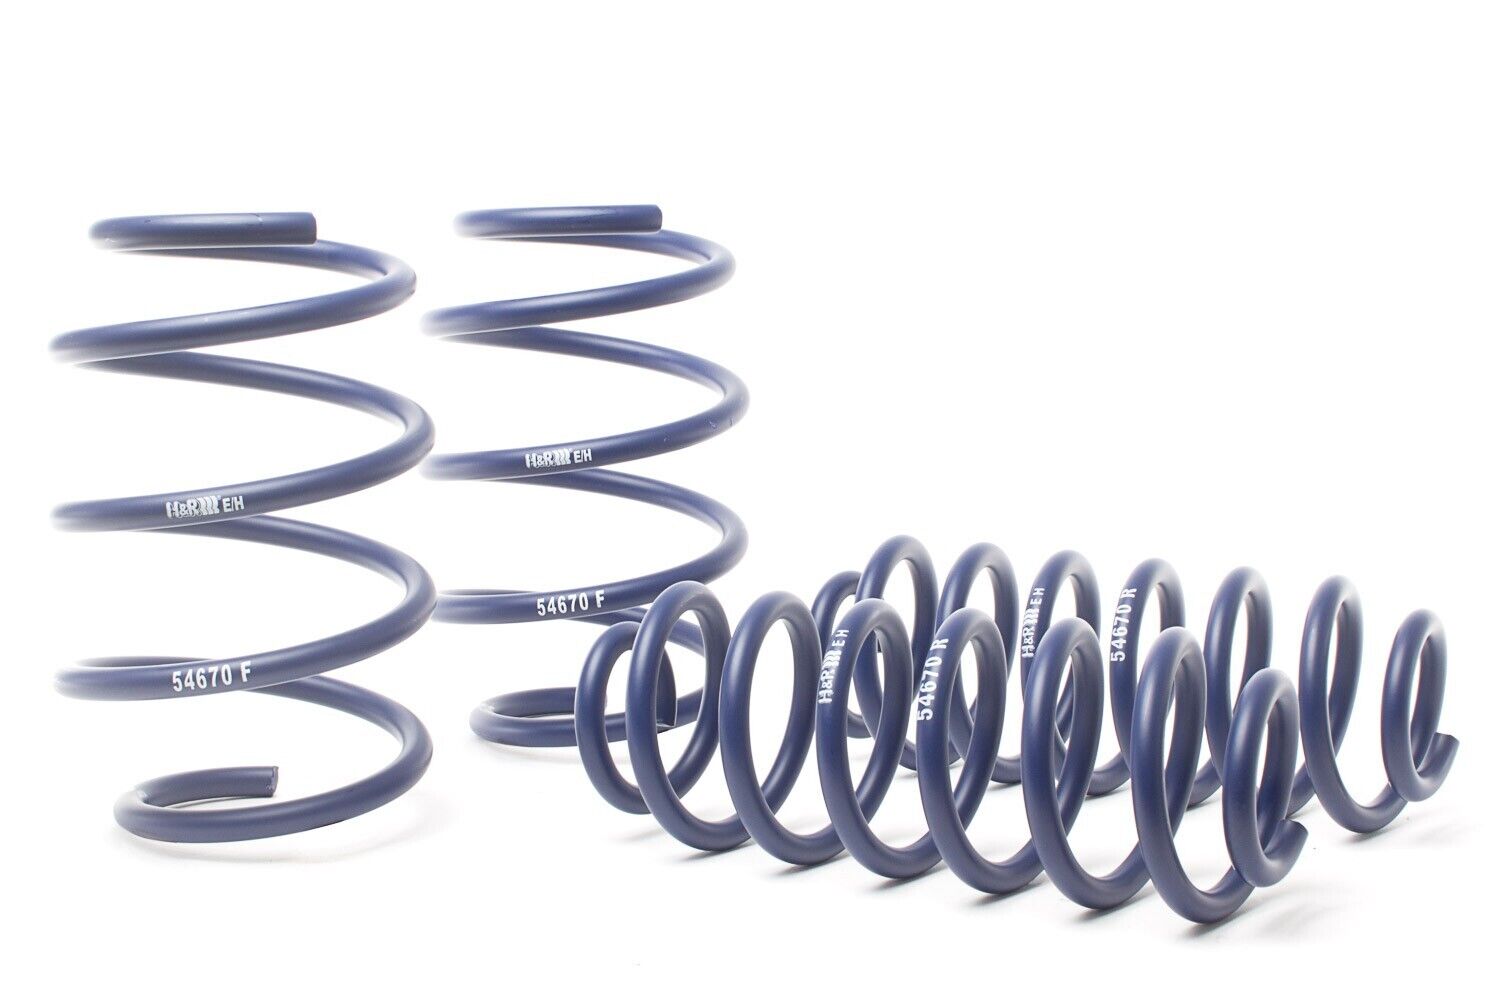 H&R 54670 Sport Lowering Springs for 18-24 Toyota Camry